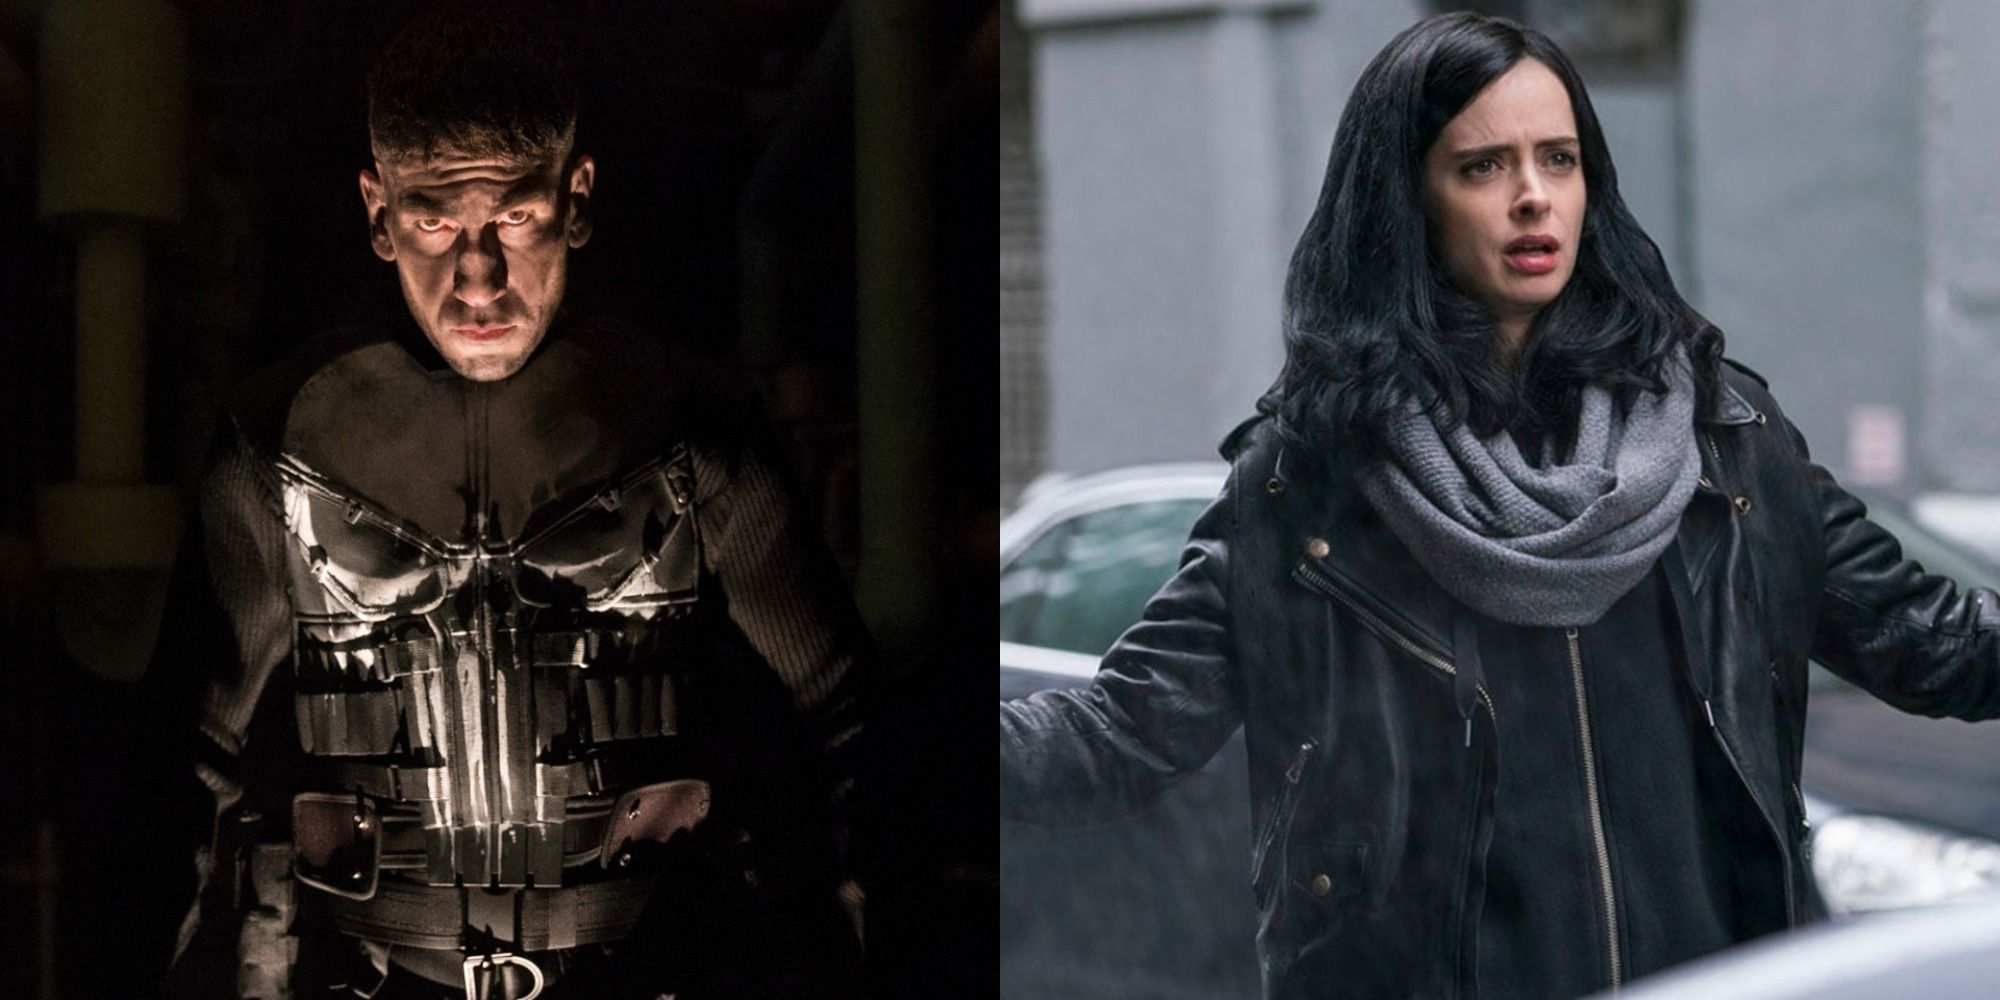 The Punisher and Jessica Jones in the MCU